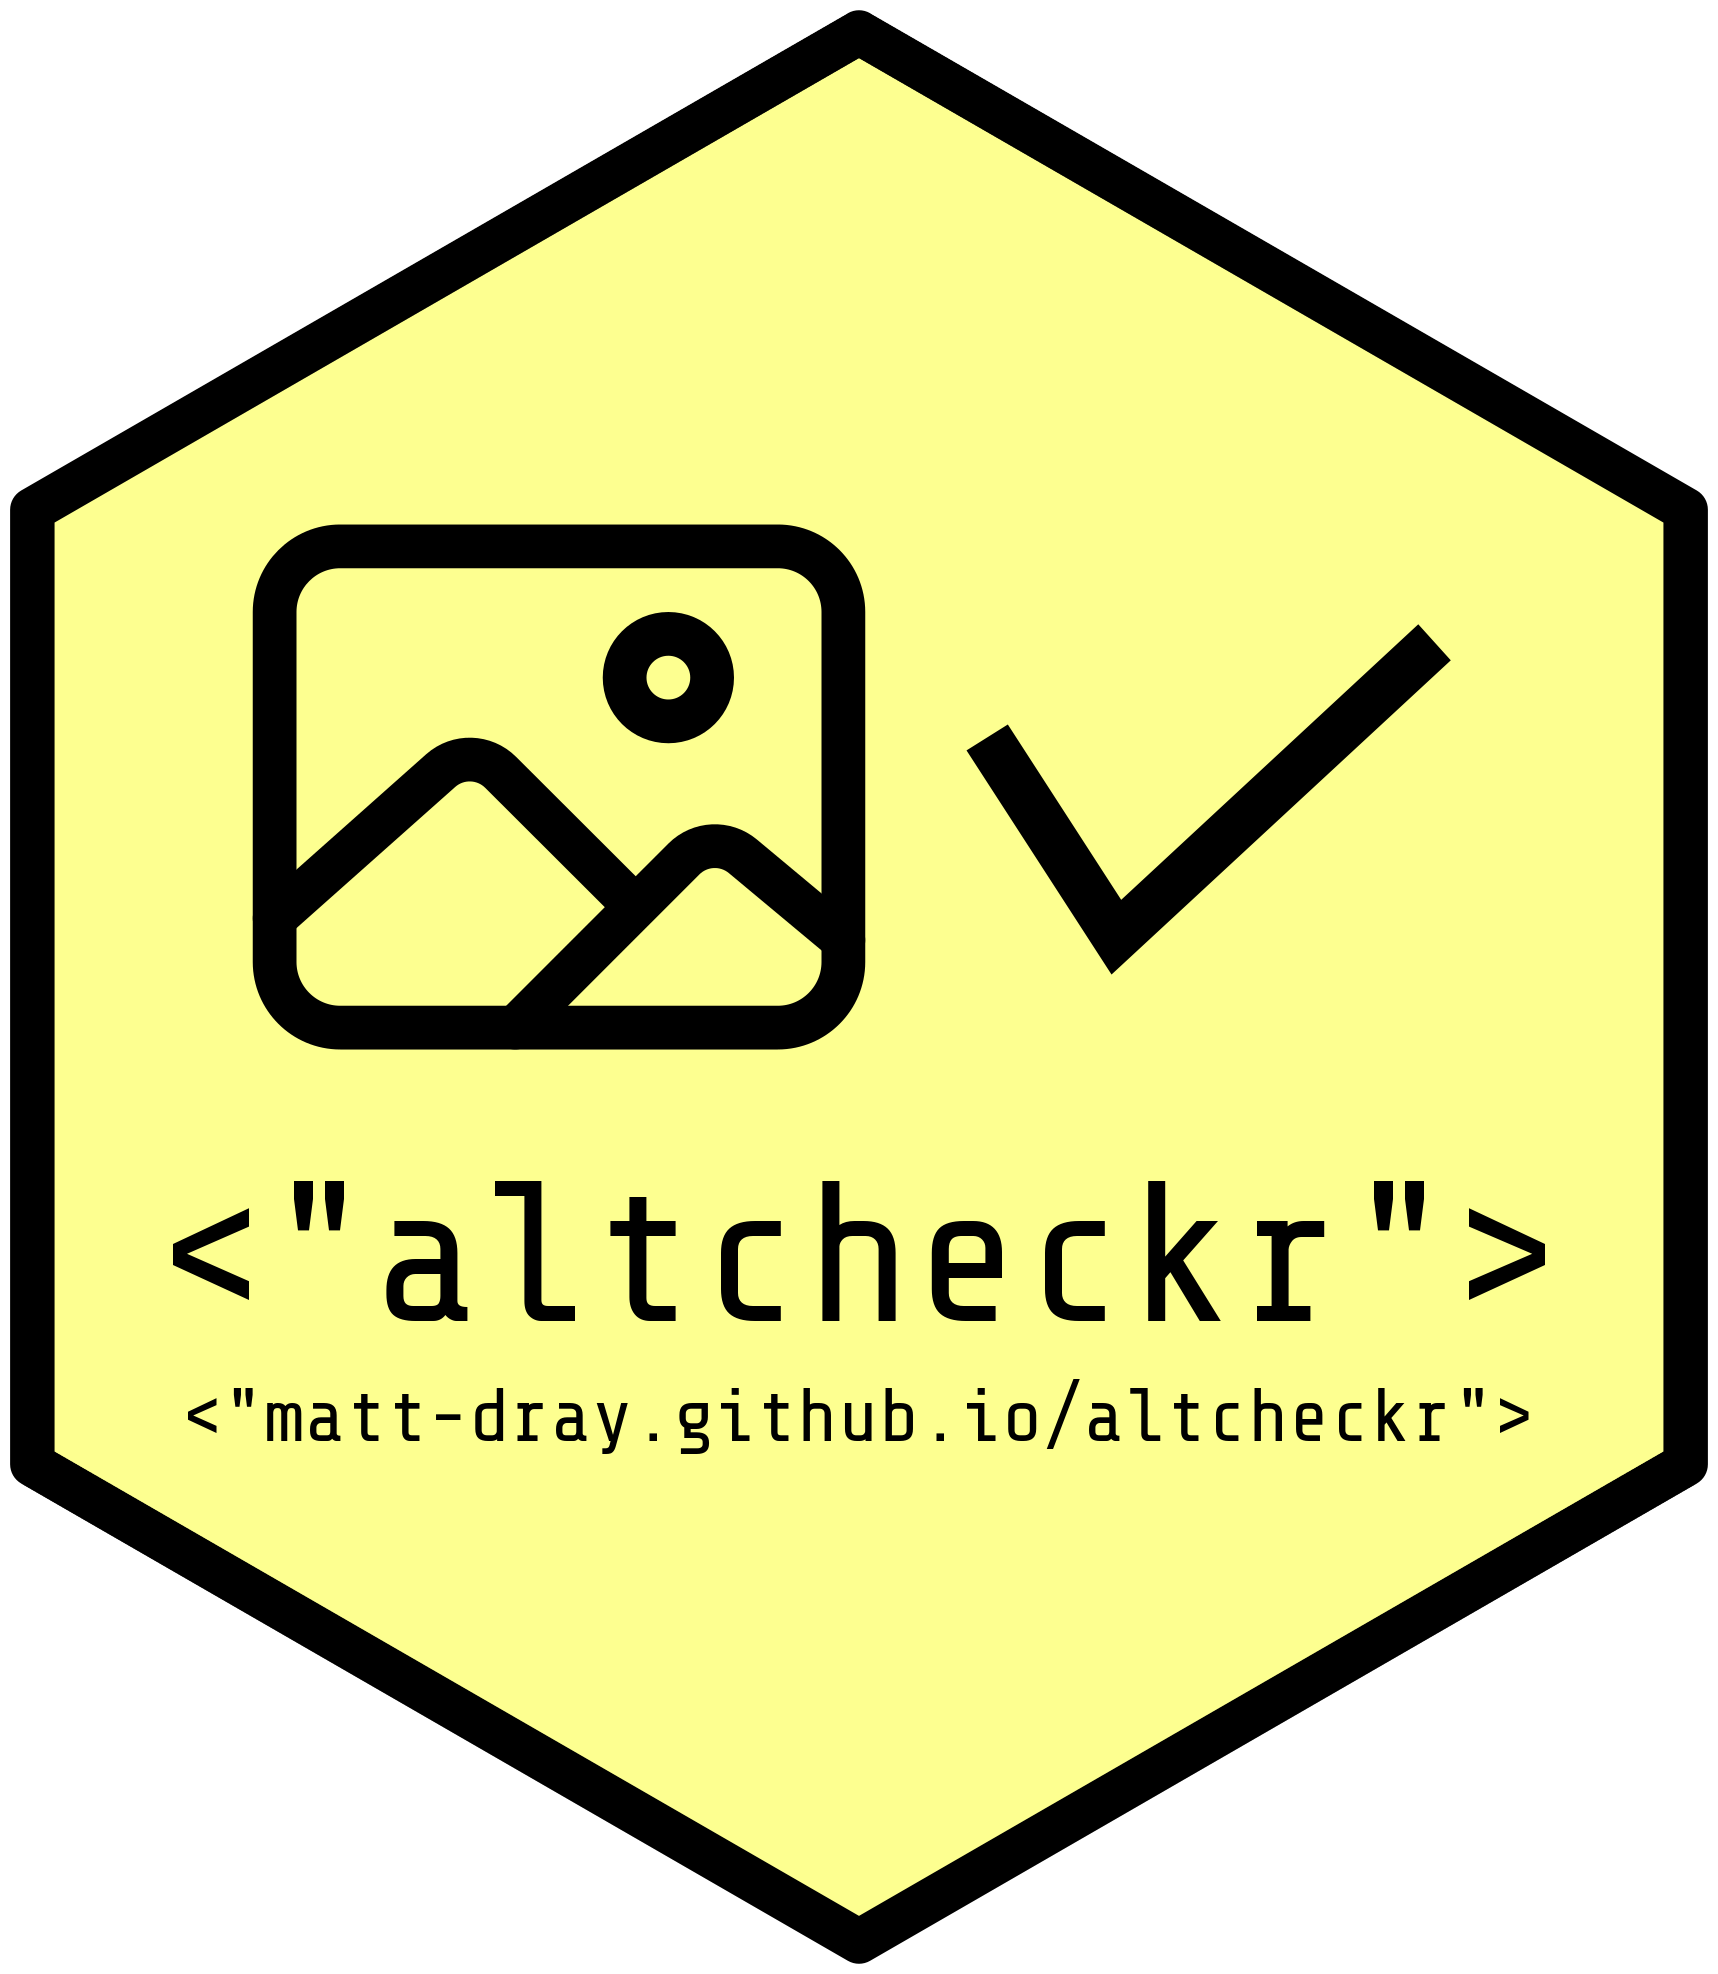 Hex sticker for altchecker, with the package name, a checkmark and the URL matt-dray.github.io/altcheckr.